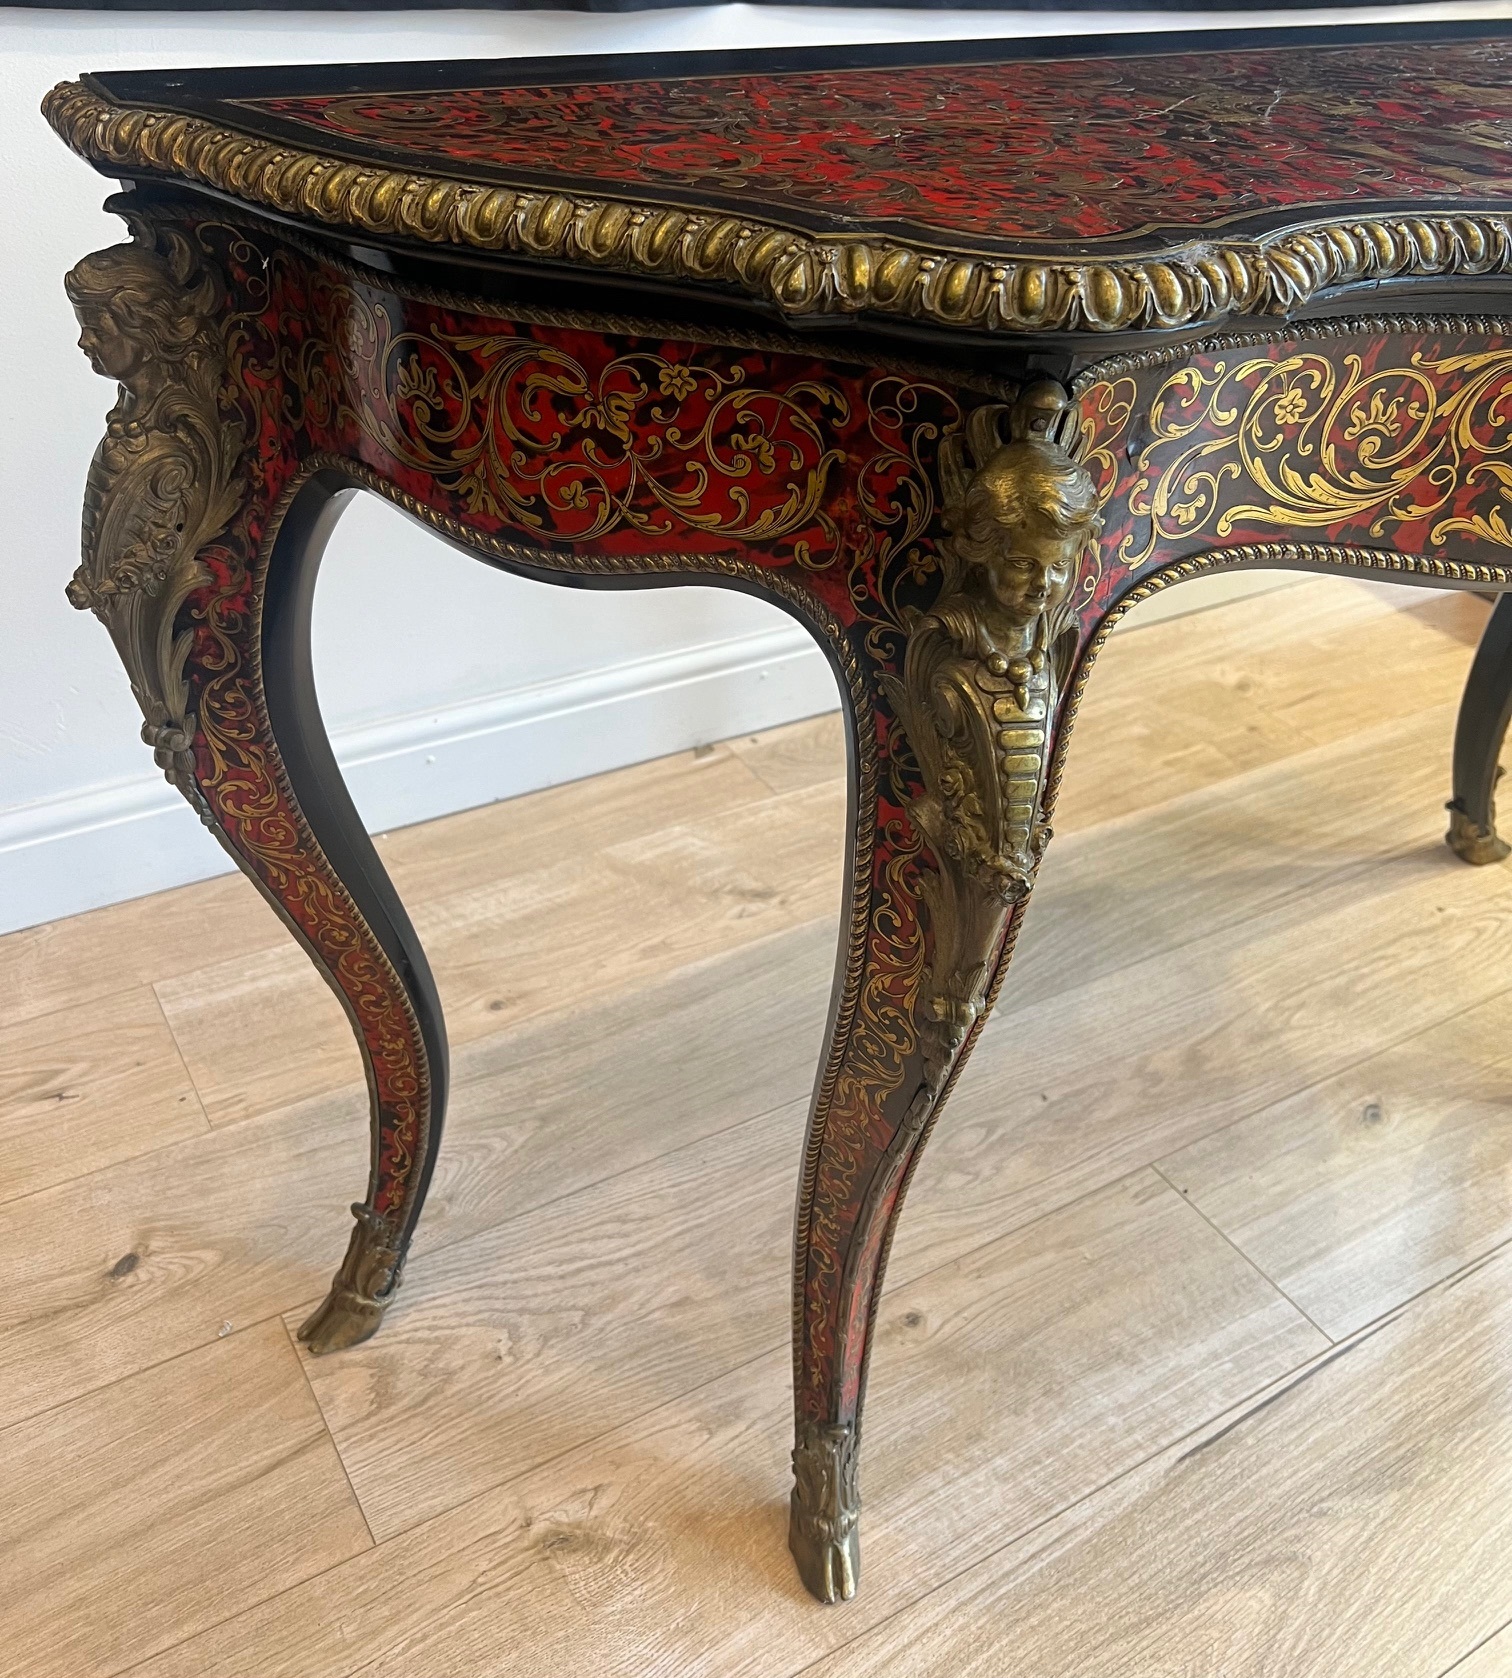 A FINE LATE 19TH CENTURY BOULLE STYLE TORTOISESHELL AND CUT BRASS CONSOLE TABLE - Image 4 of 6